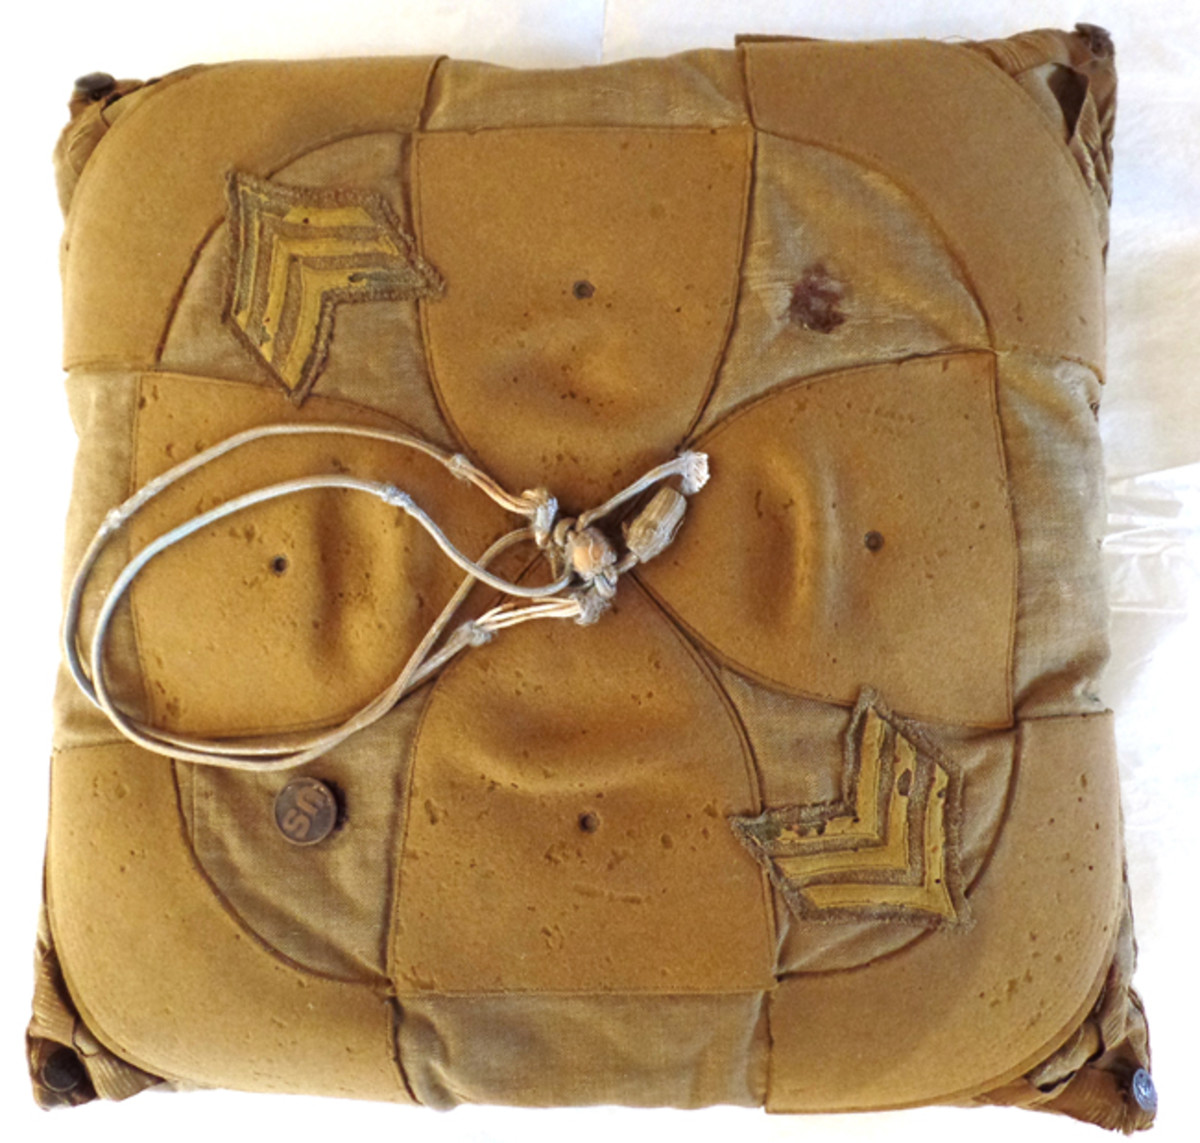  The top of the pillow found in the Rector House in 2018 is decorated with a cross pattern in the center. It, and the corners, were made from a campaign hat. The other surface areas were made from uniform material. Also visible are a collar disk, campaign hat cord, a pair of sergeant’s stripes (a souvenir perhaps), and service coat pocket buttons on the corners.